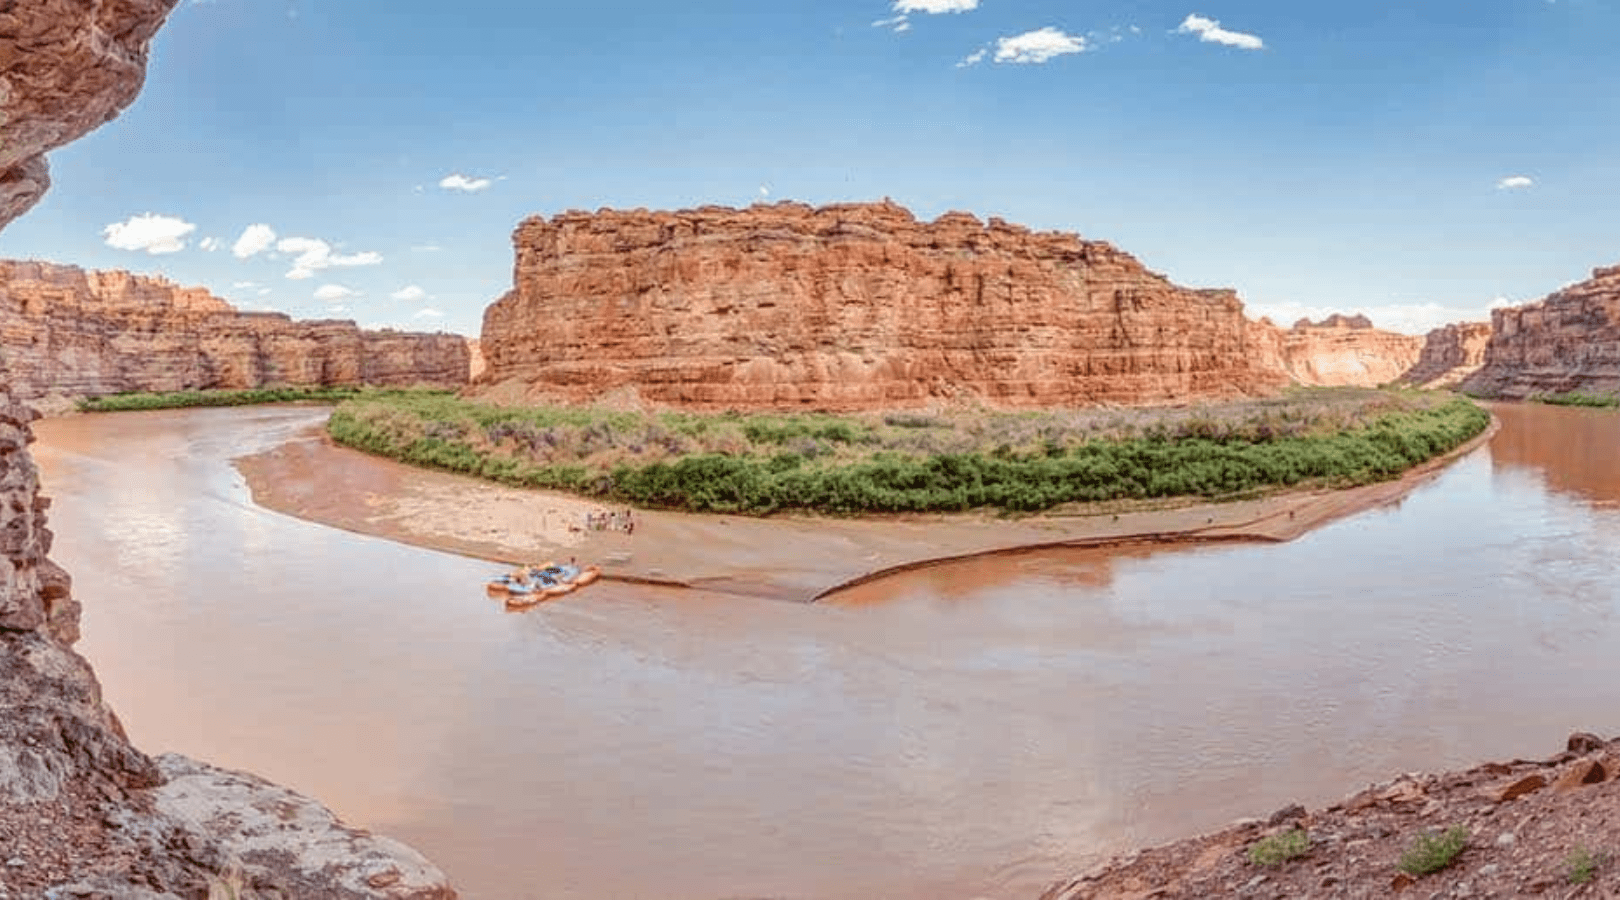 views from across the colorado river of rafts shored up in cataract canyon with red rock canyon walls in the back